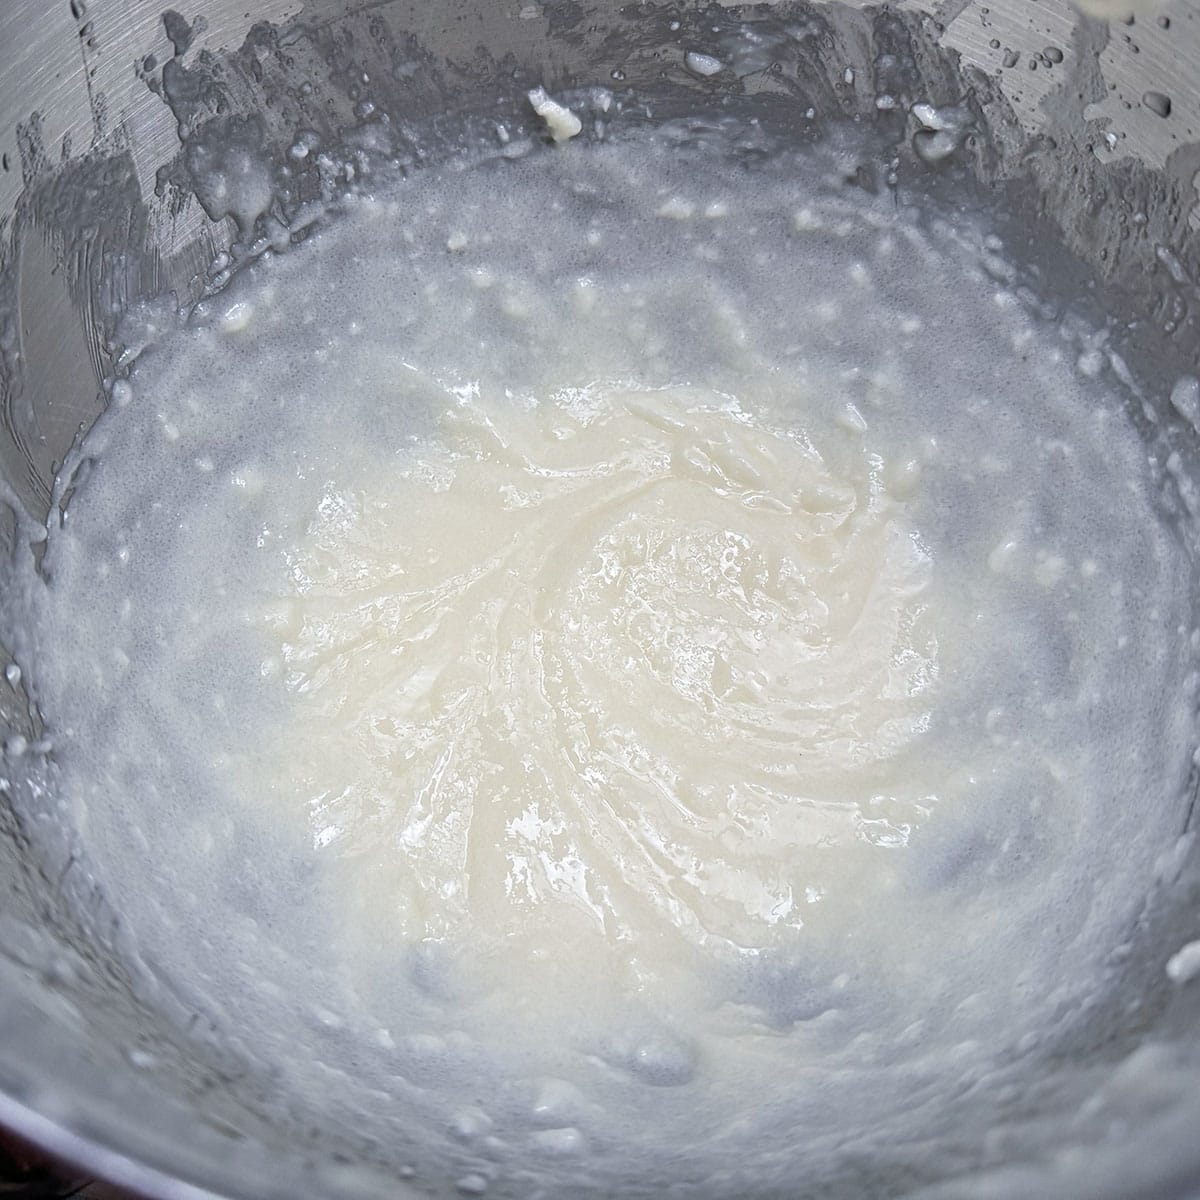 Oil and butter mixed in a mixer bowl.